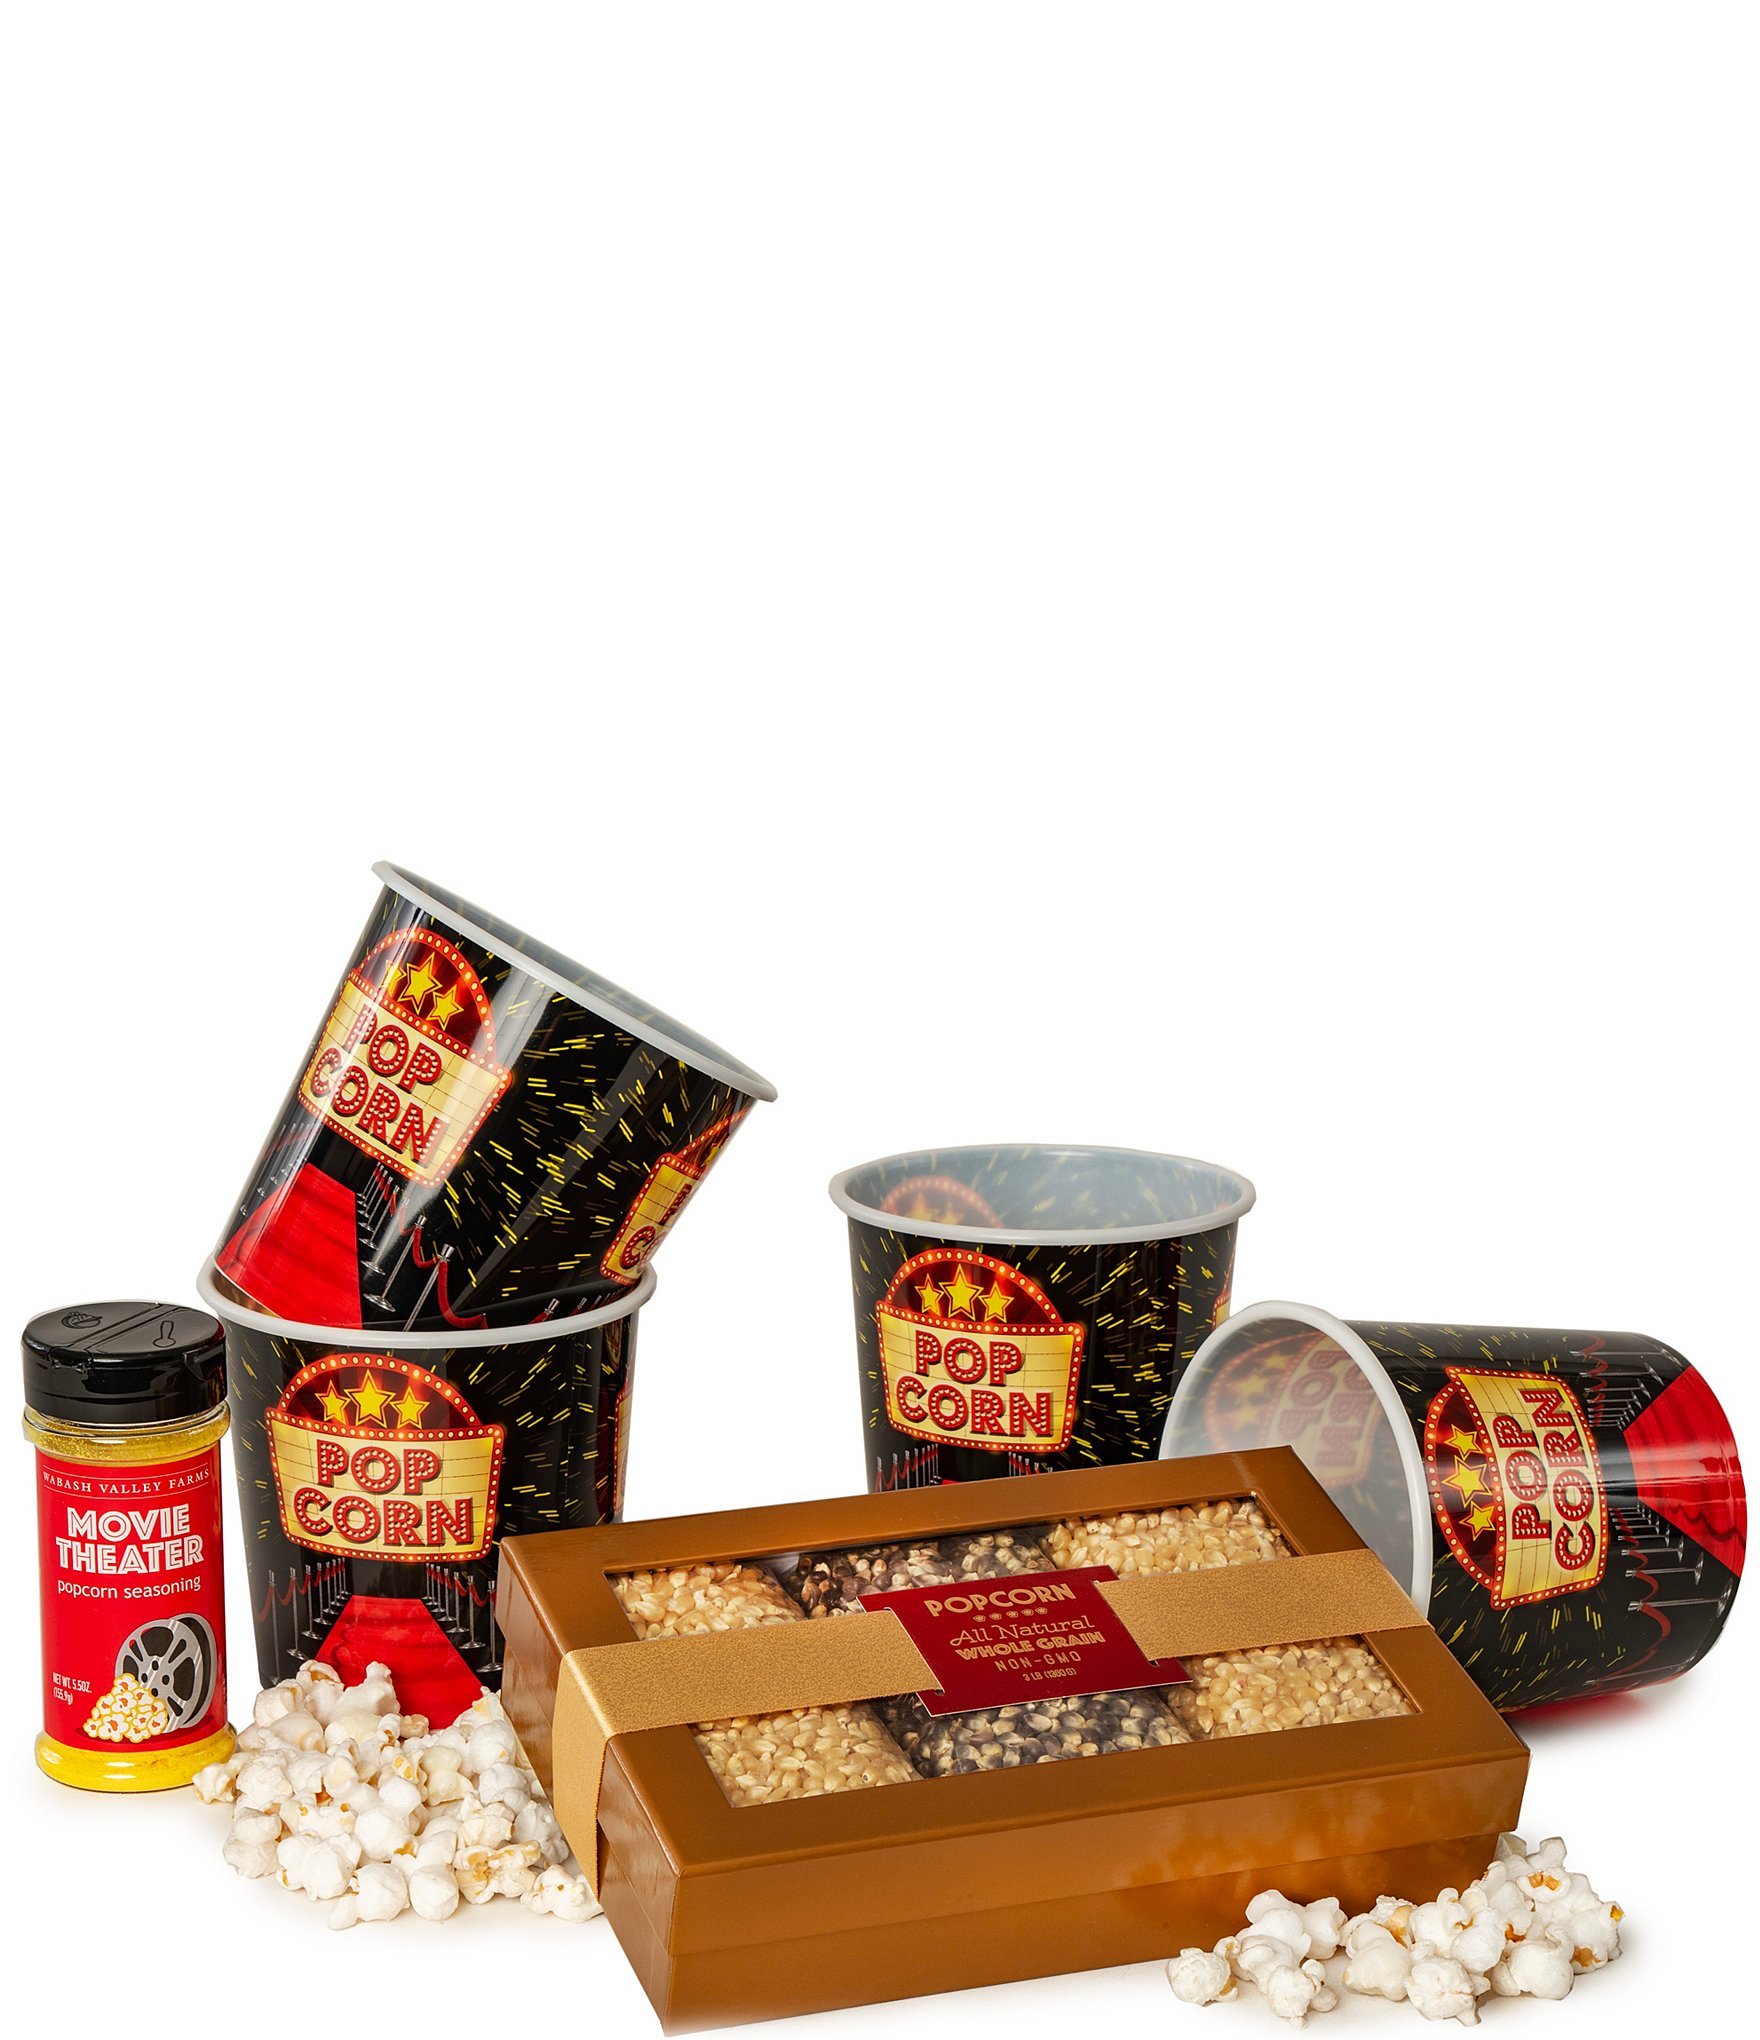 https://dimg.dillards.com/is/image/DillardsZoom/zoom/wabash-valley-farms-elevated-snacking-experience---popcorn-all-natural-gift-set/00000000_zi_20435839.jpg